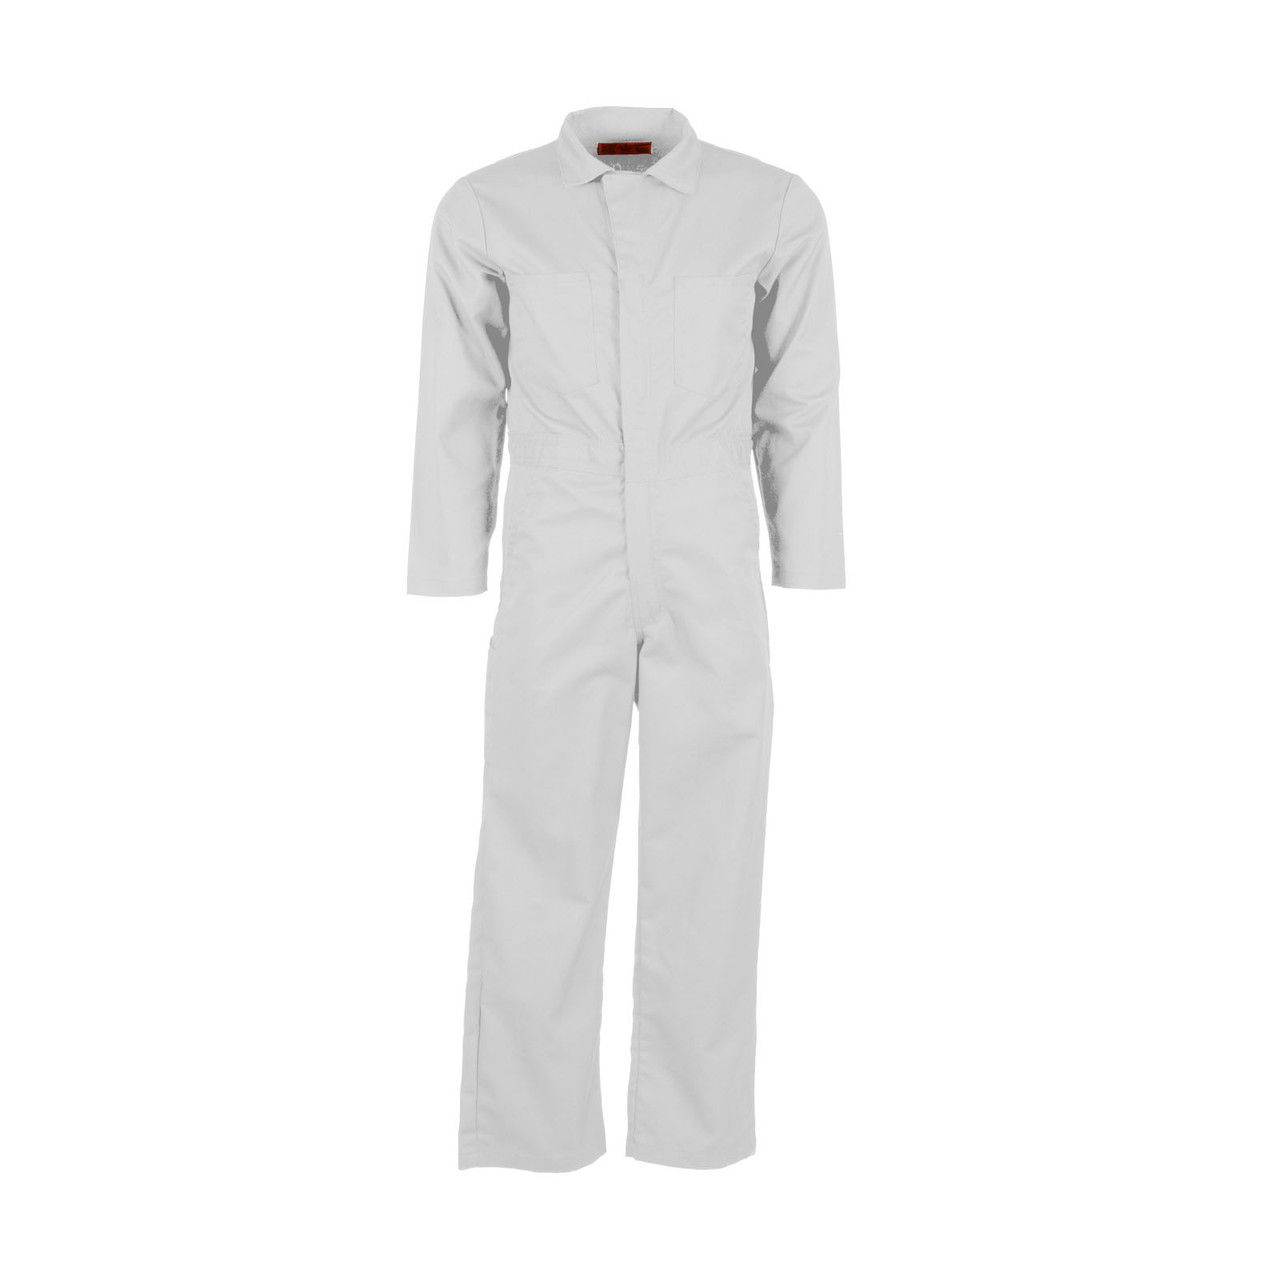 CV10WH White Coverall by Pinnacle Textile Questions & Answers